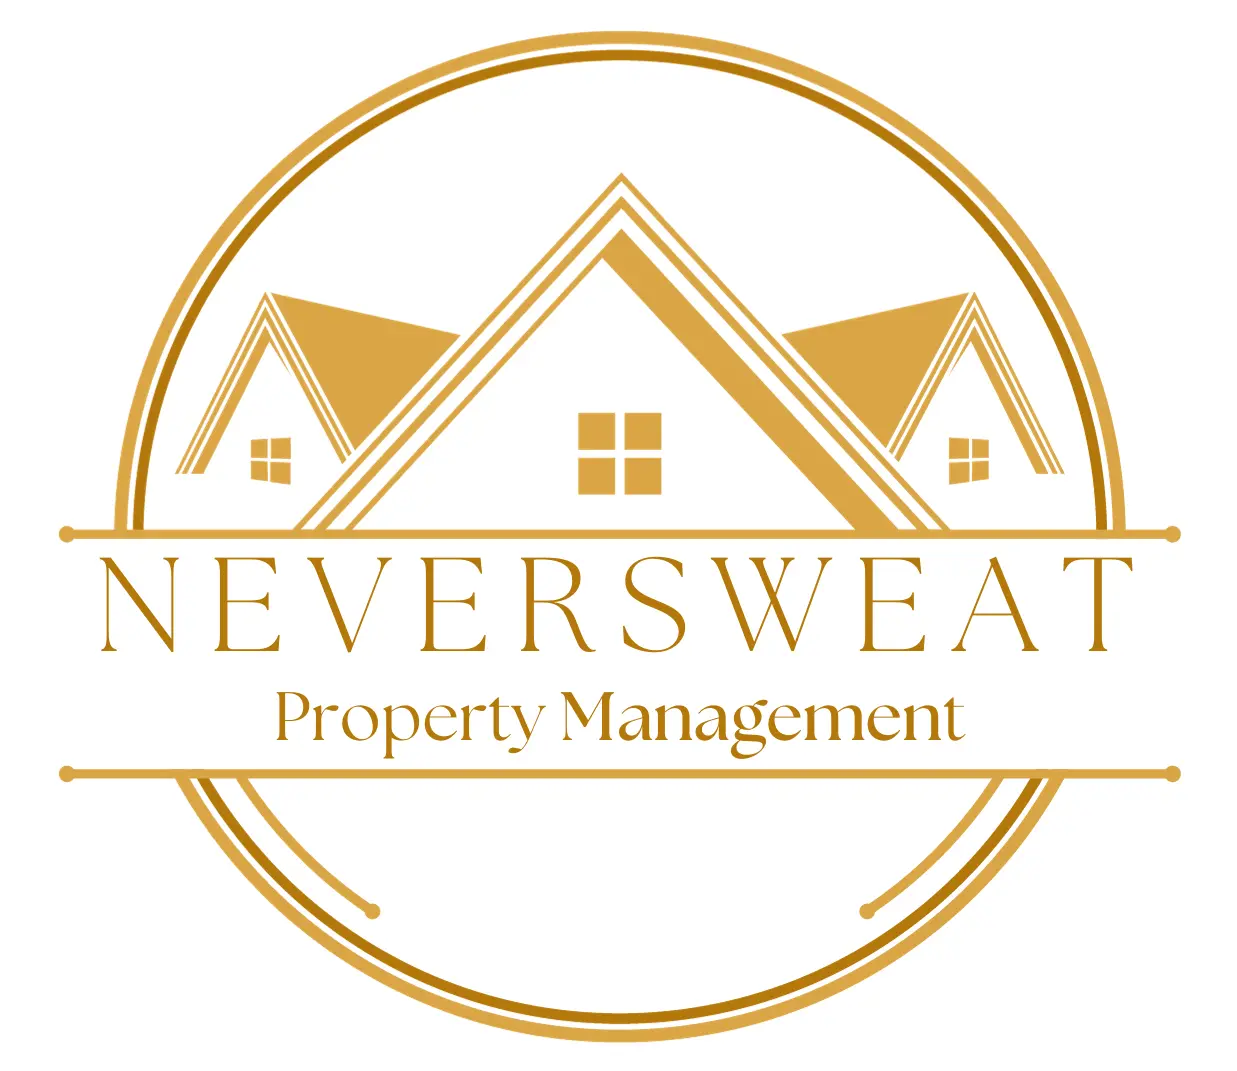 A logo of neversweat property management